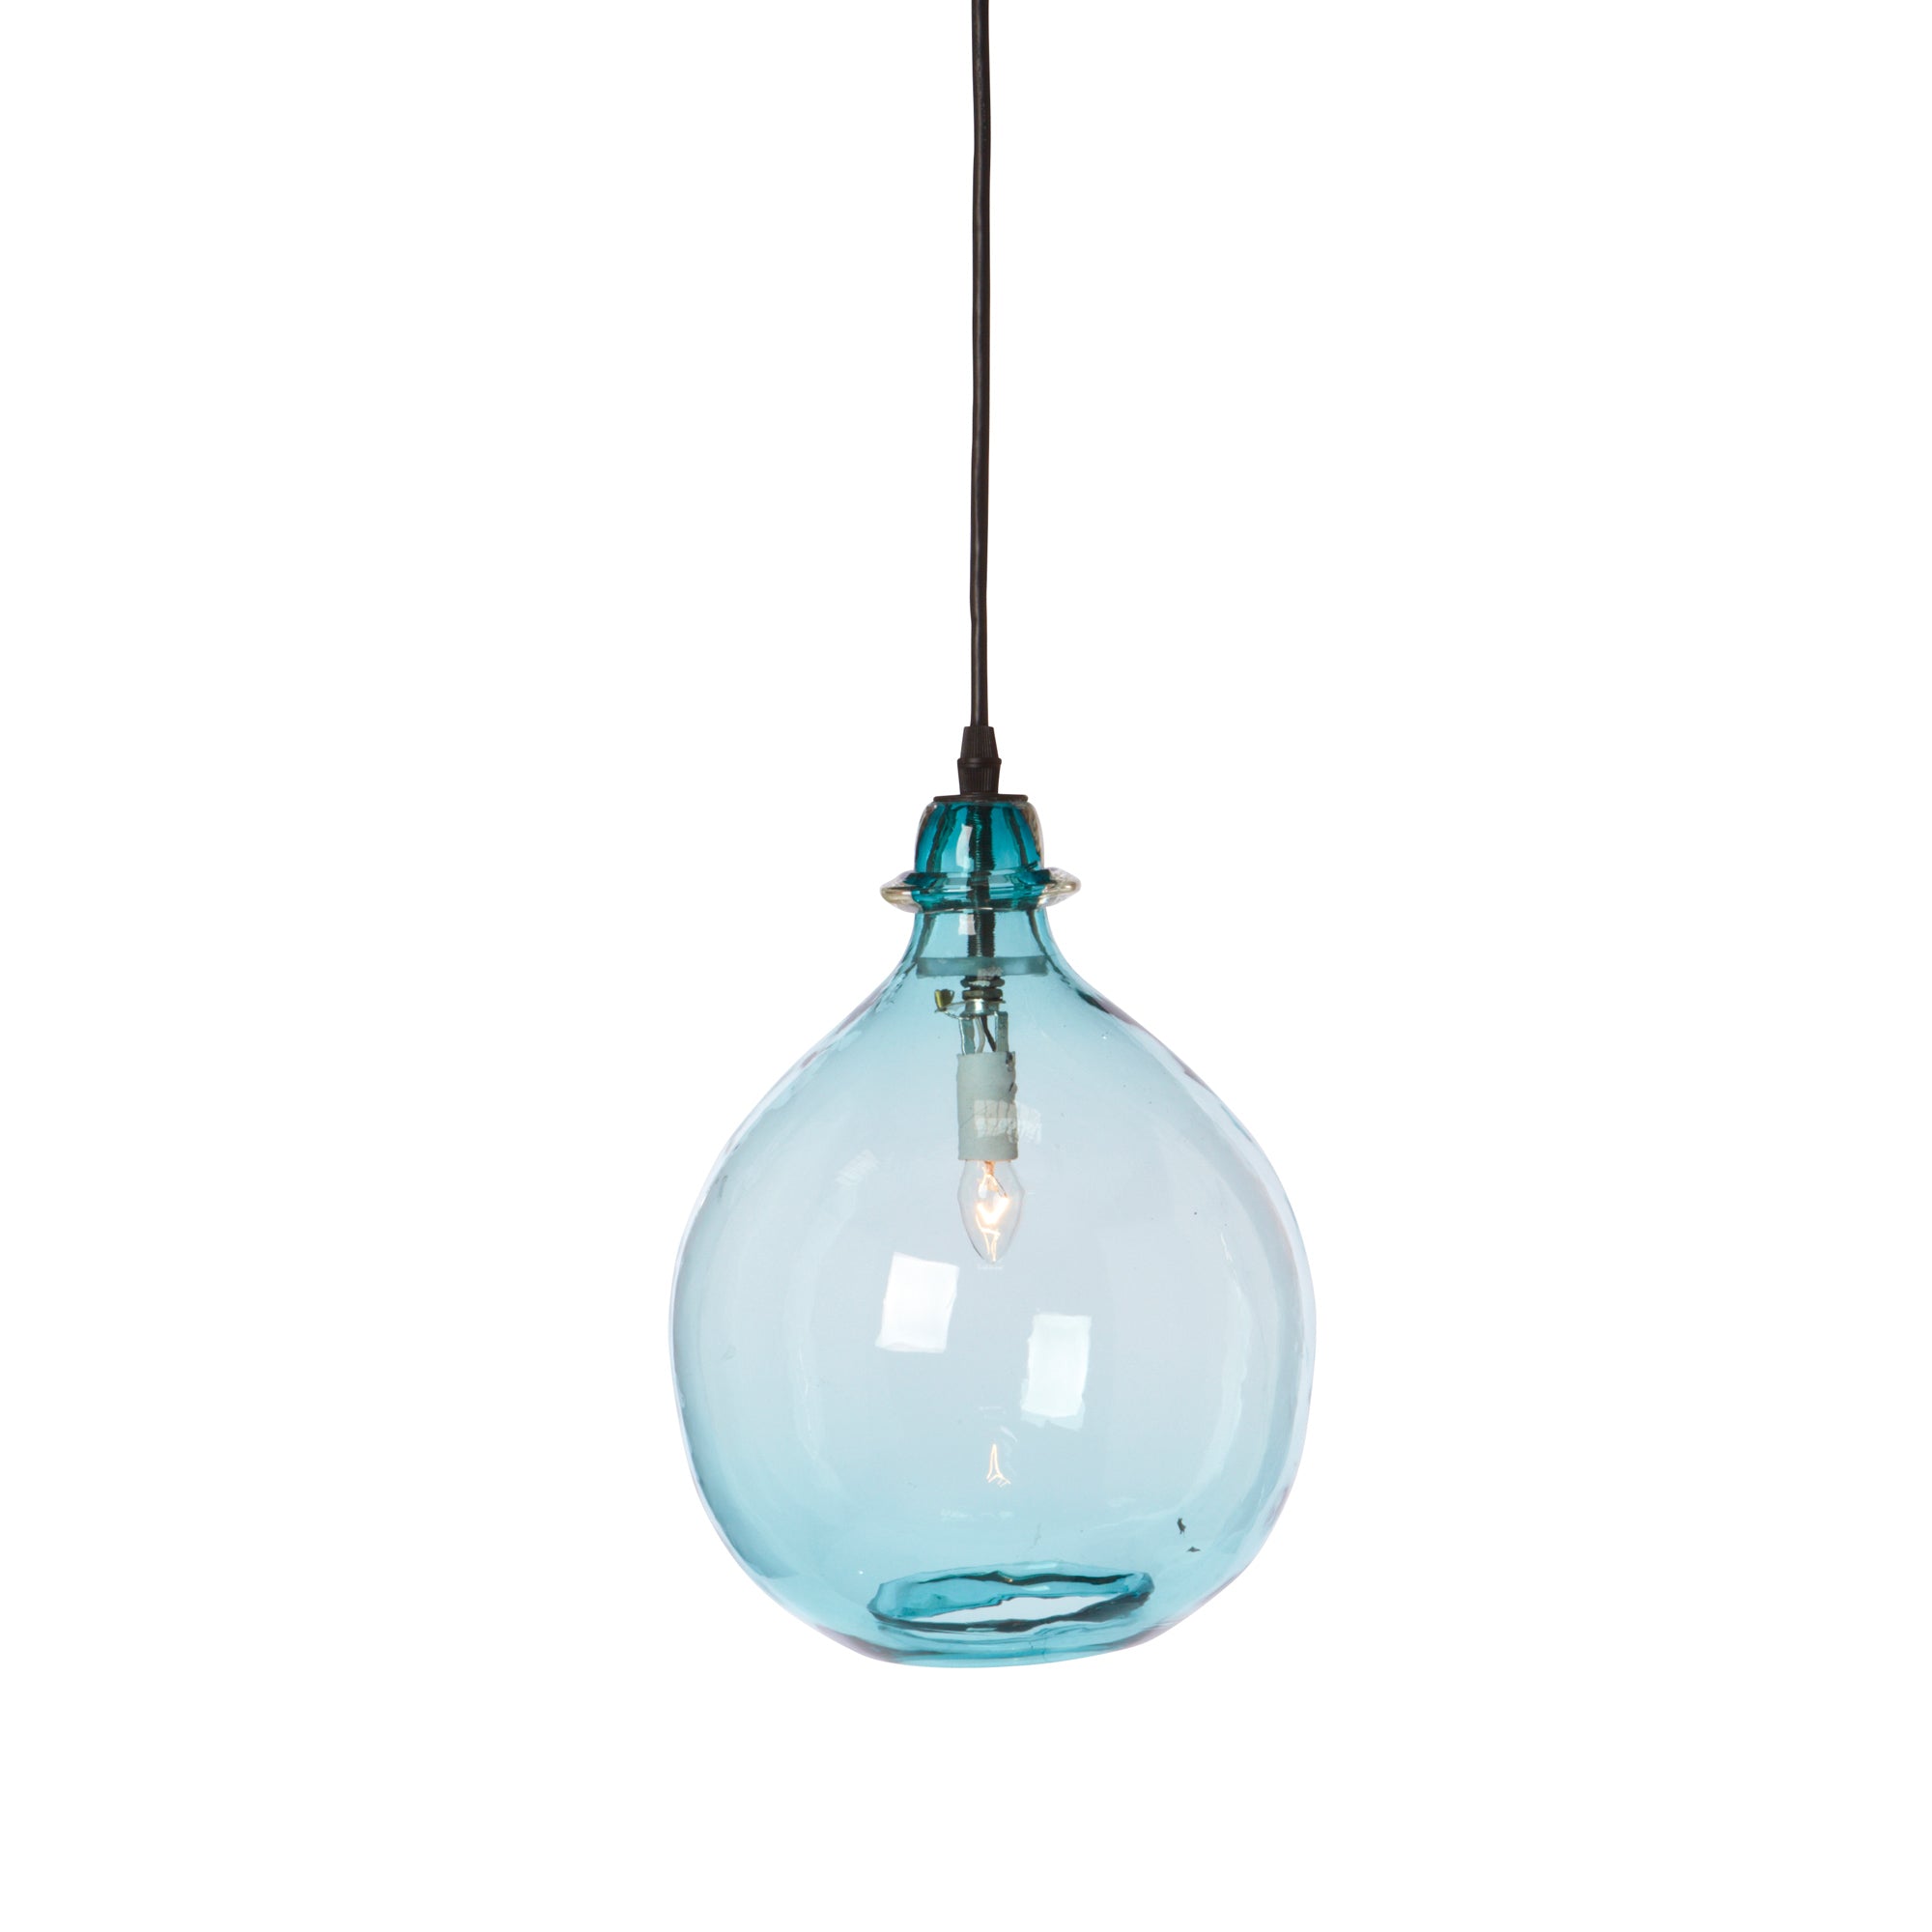  Jug Lamp Small - Turquoise 